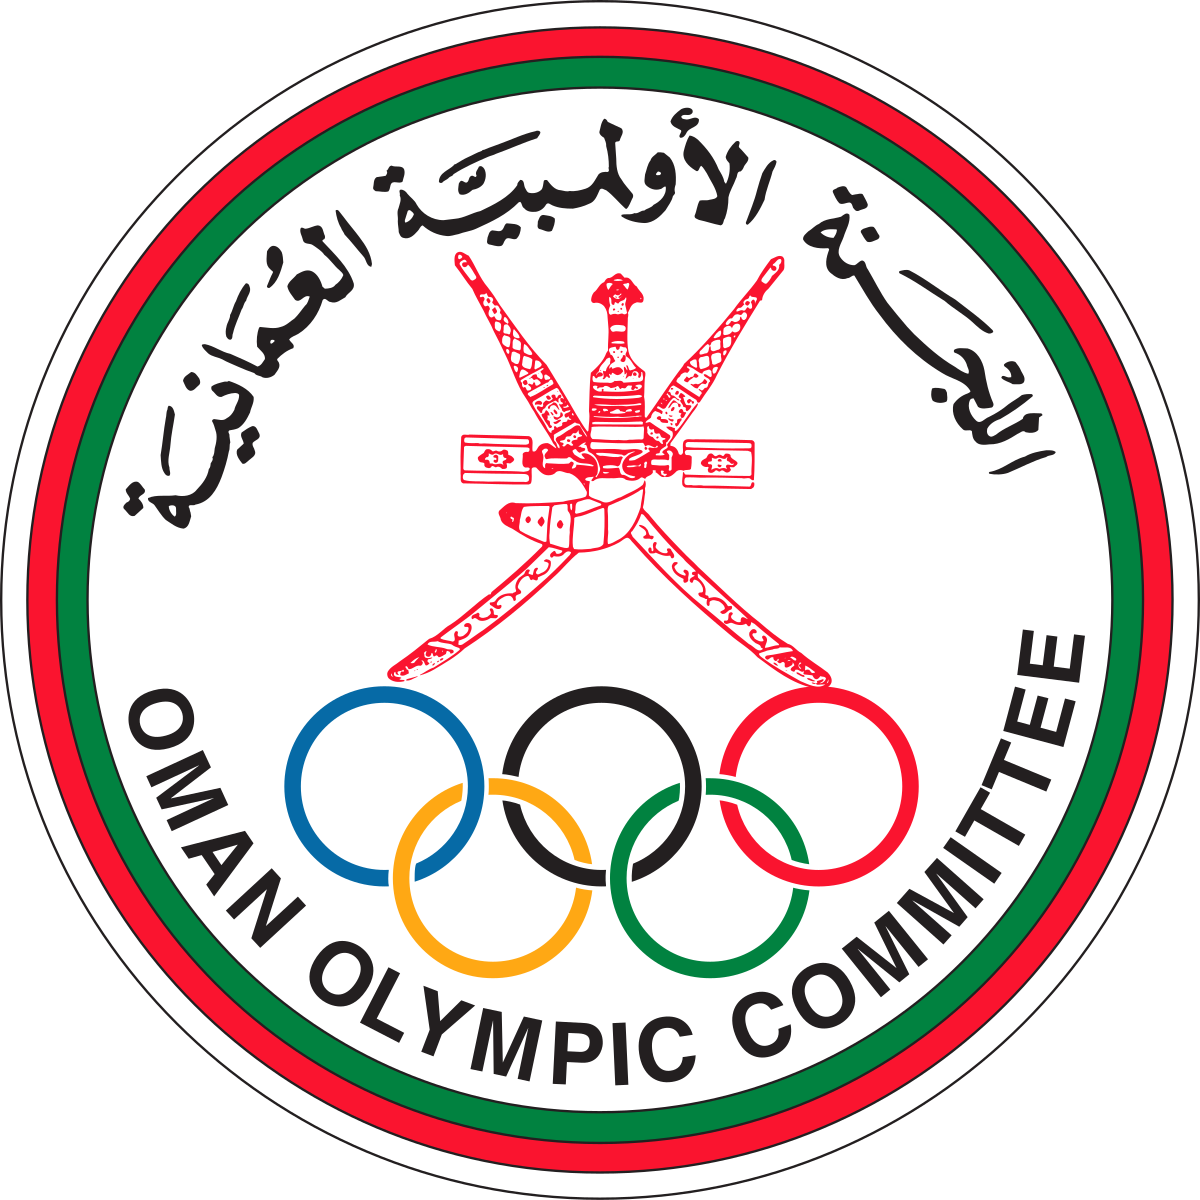 Oman Olympic Committee hold finance course for officials